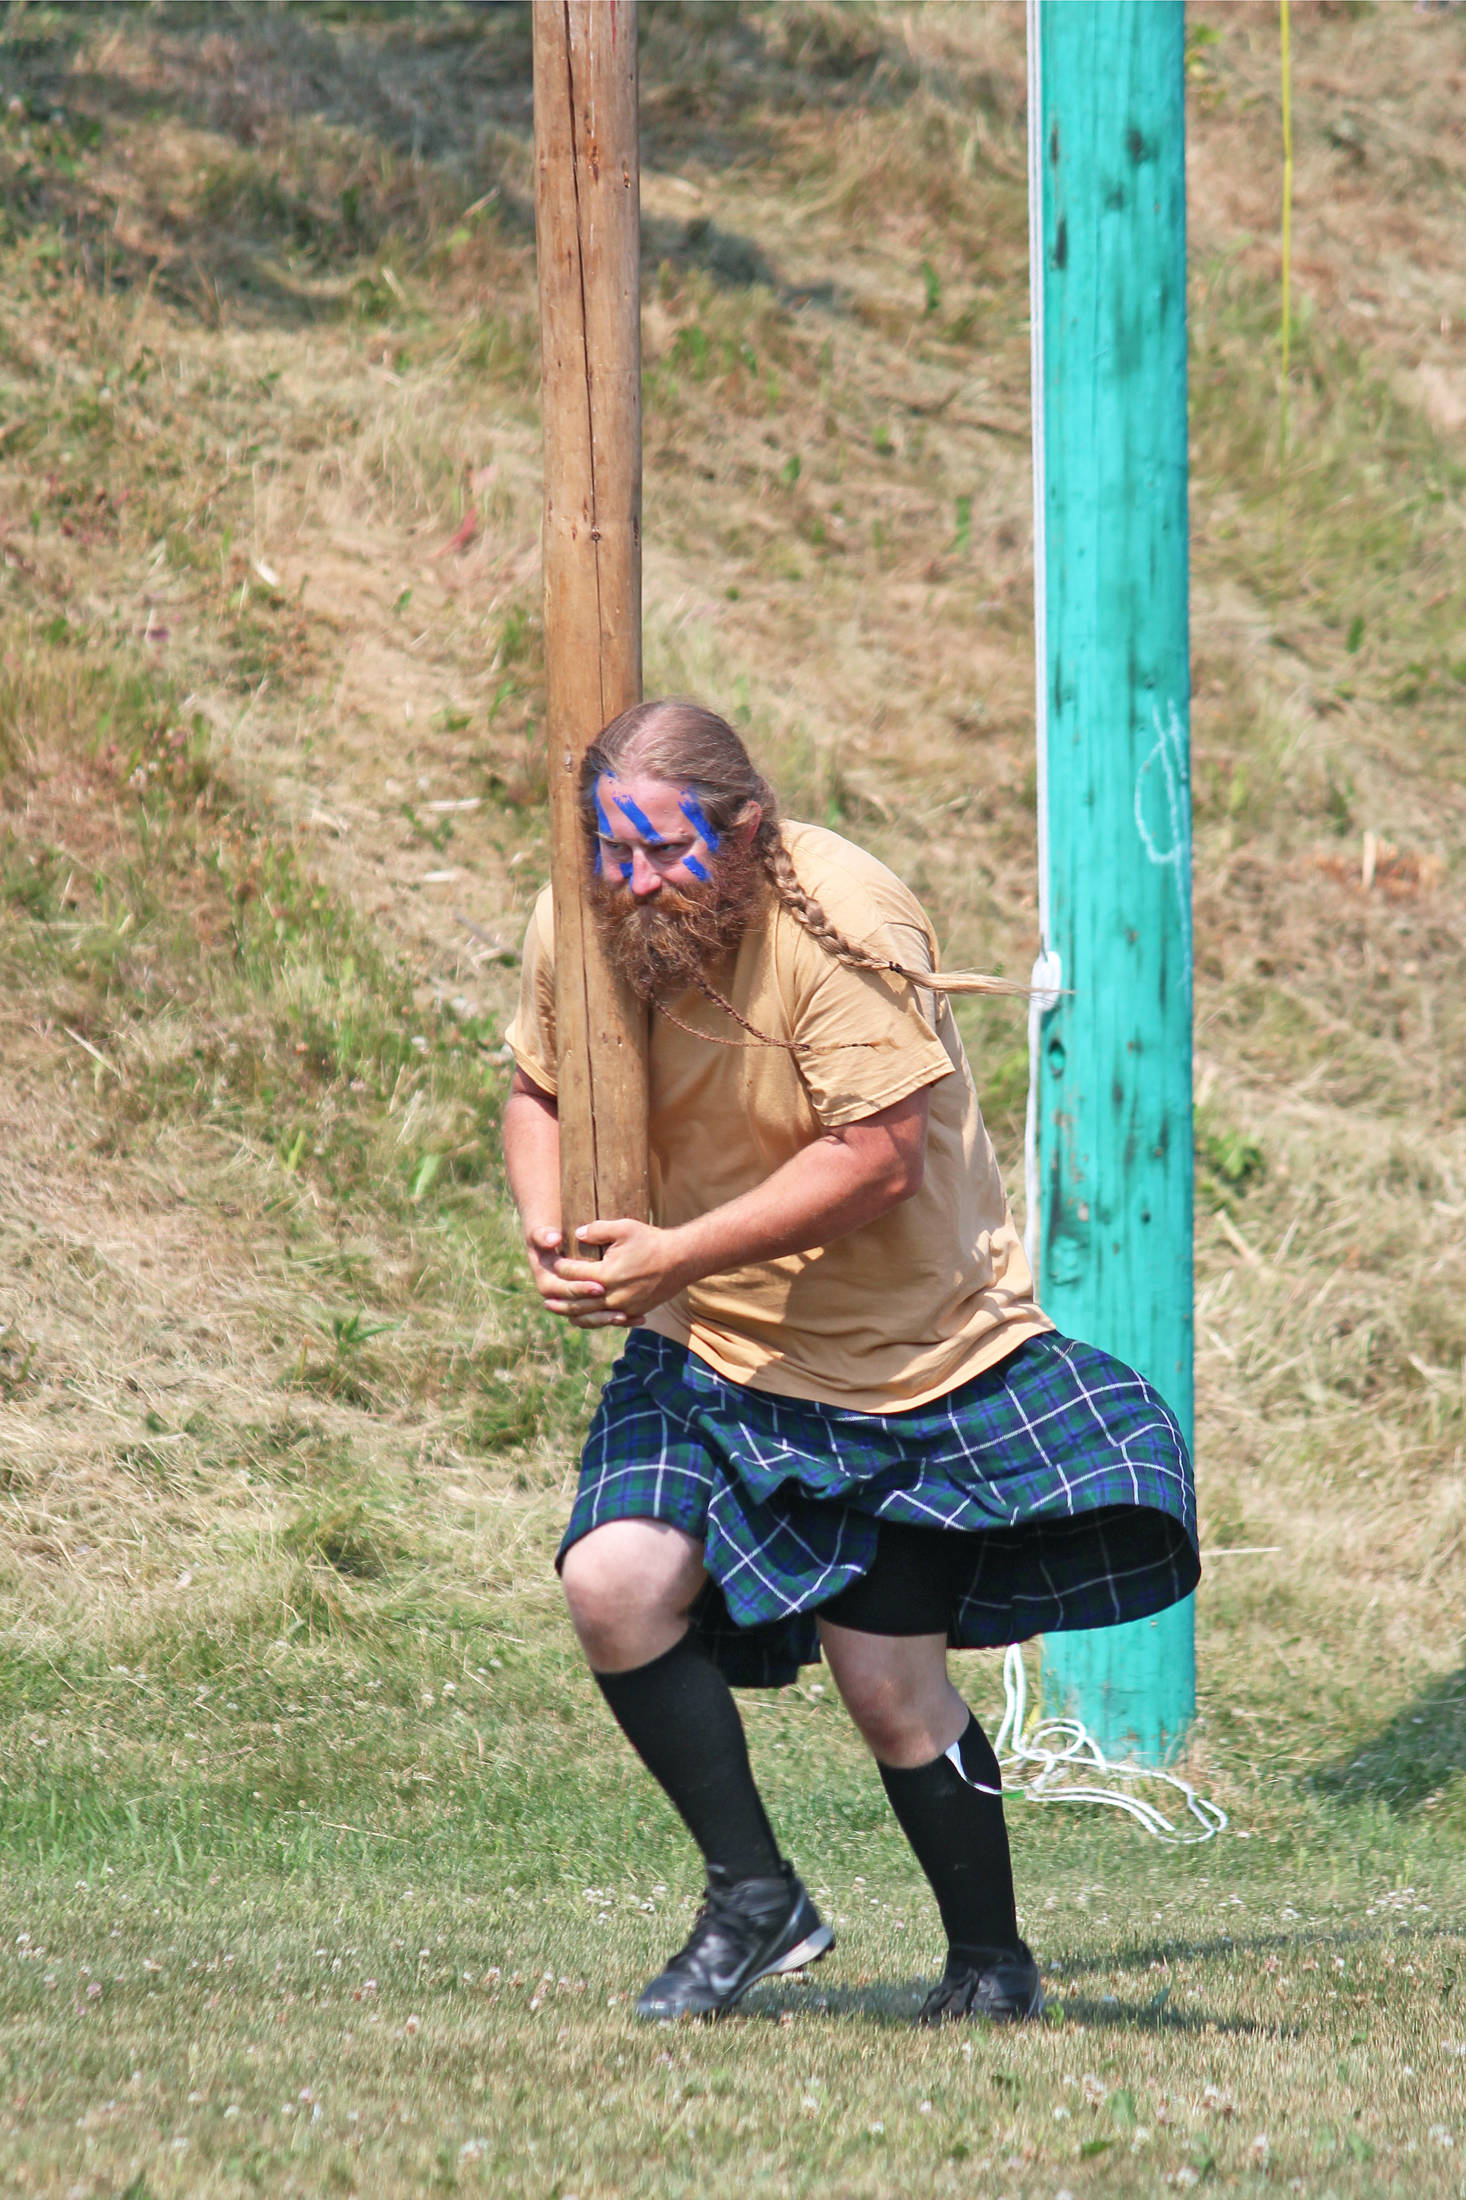 Charles Knefelkamp walks a caber forward before throwing it during the men’s caber toss event at the Kachemak Bay Highland Games on Saturday, July 6, 2019 at Karen Hornaday Park in Homer, Alaska. (Photo by Megan Pacer/Homer News)